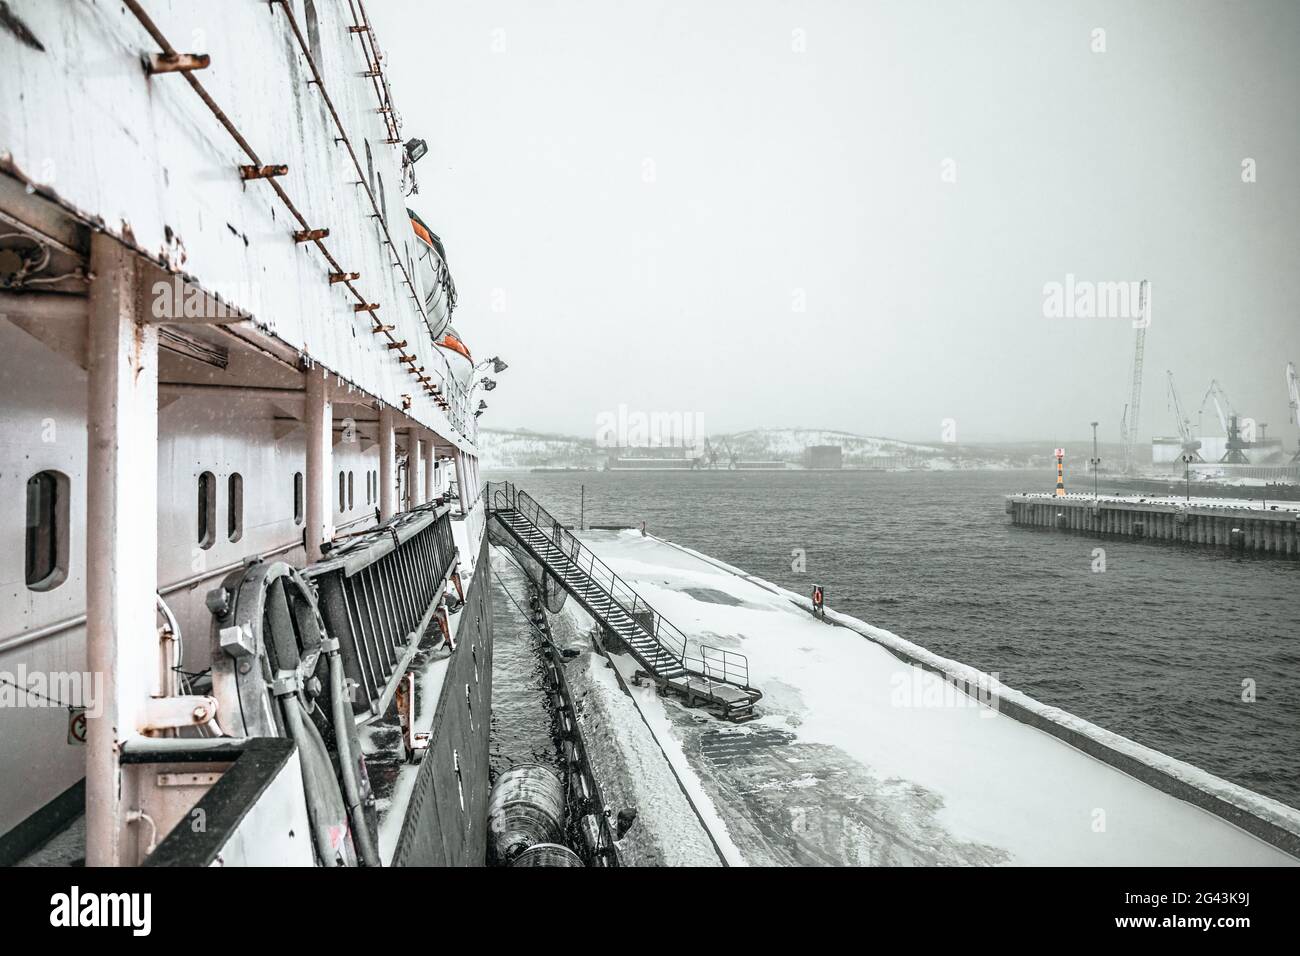 View of the port in Murmansk from the icebreaker Krassin, Russia Stock Photo